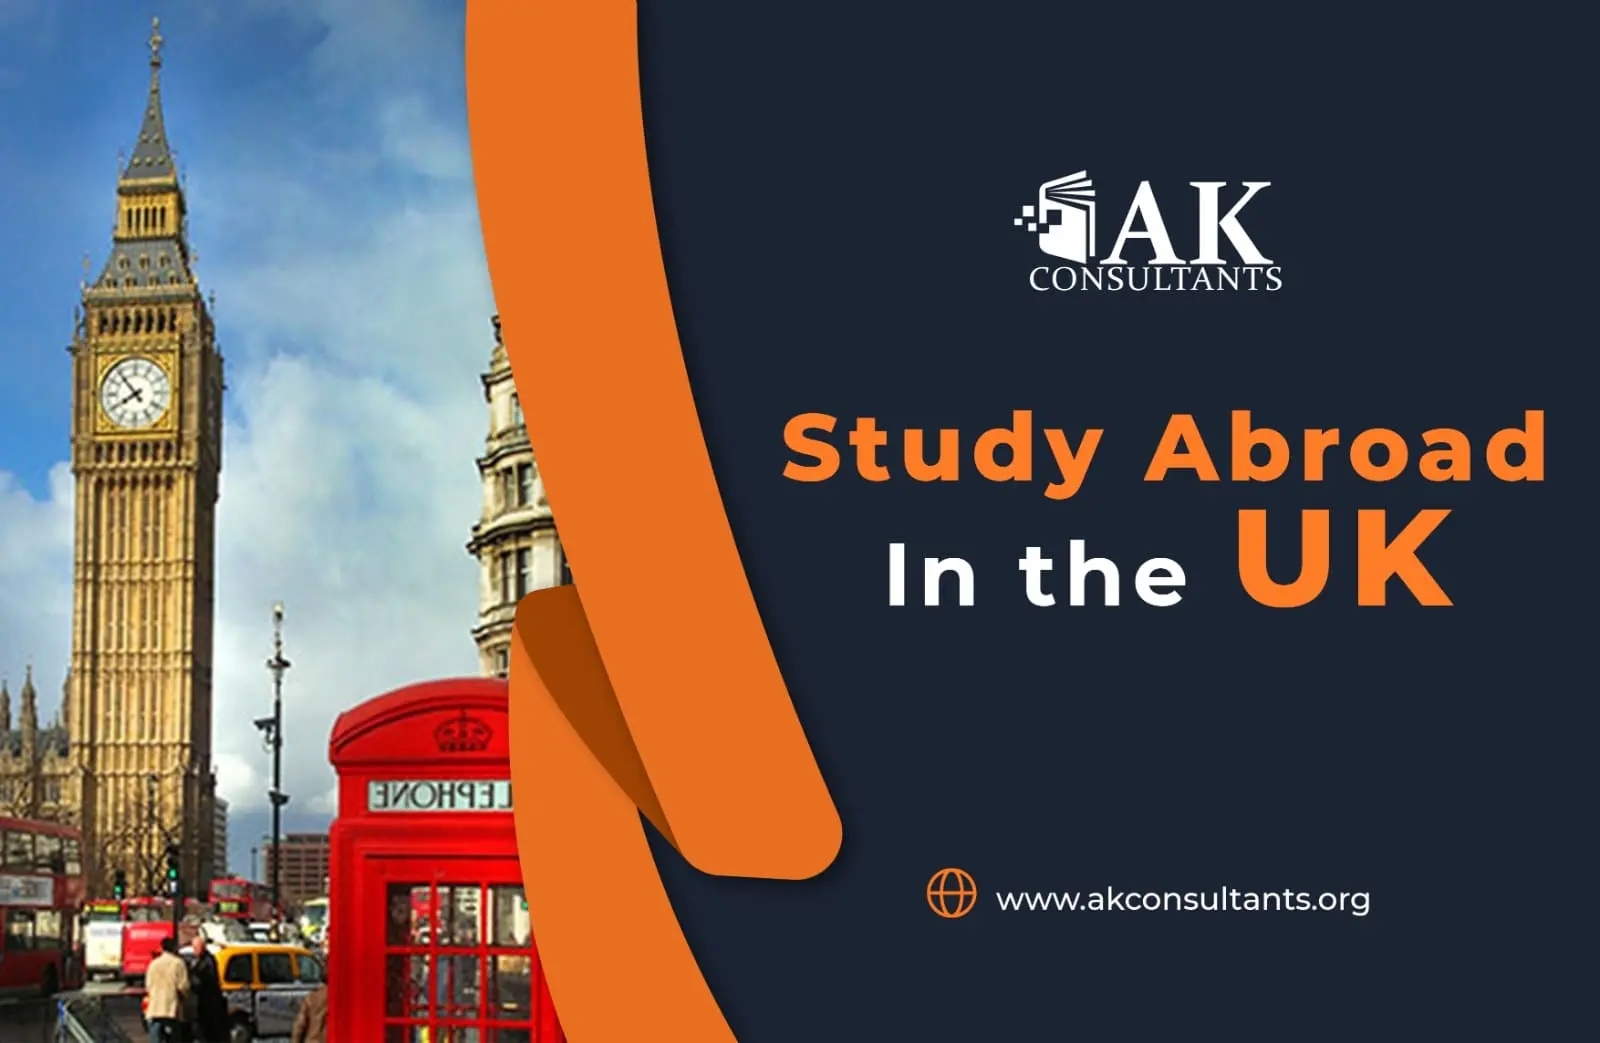 Study abroad in UK written in text with company logo